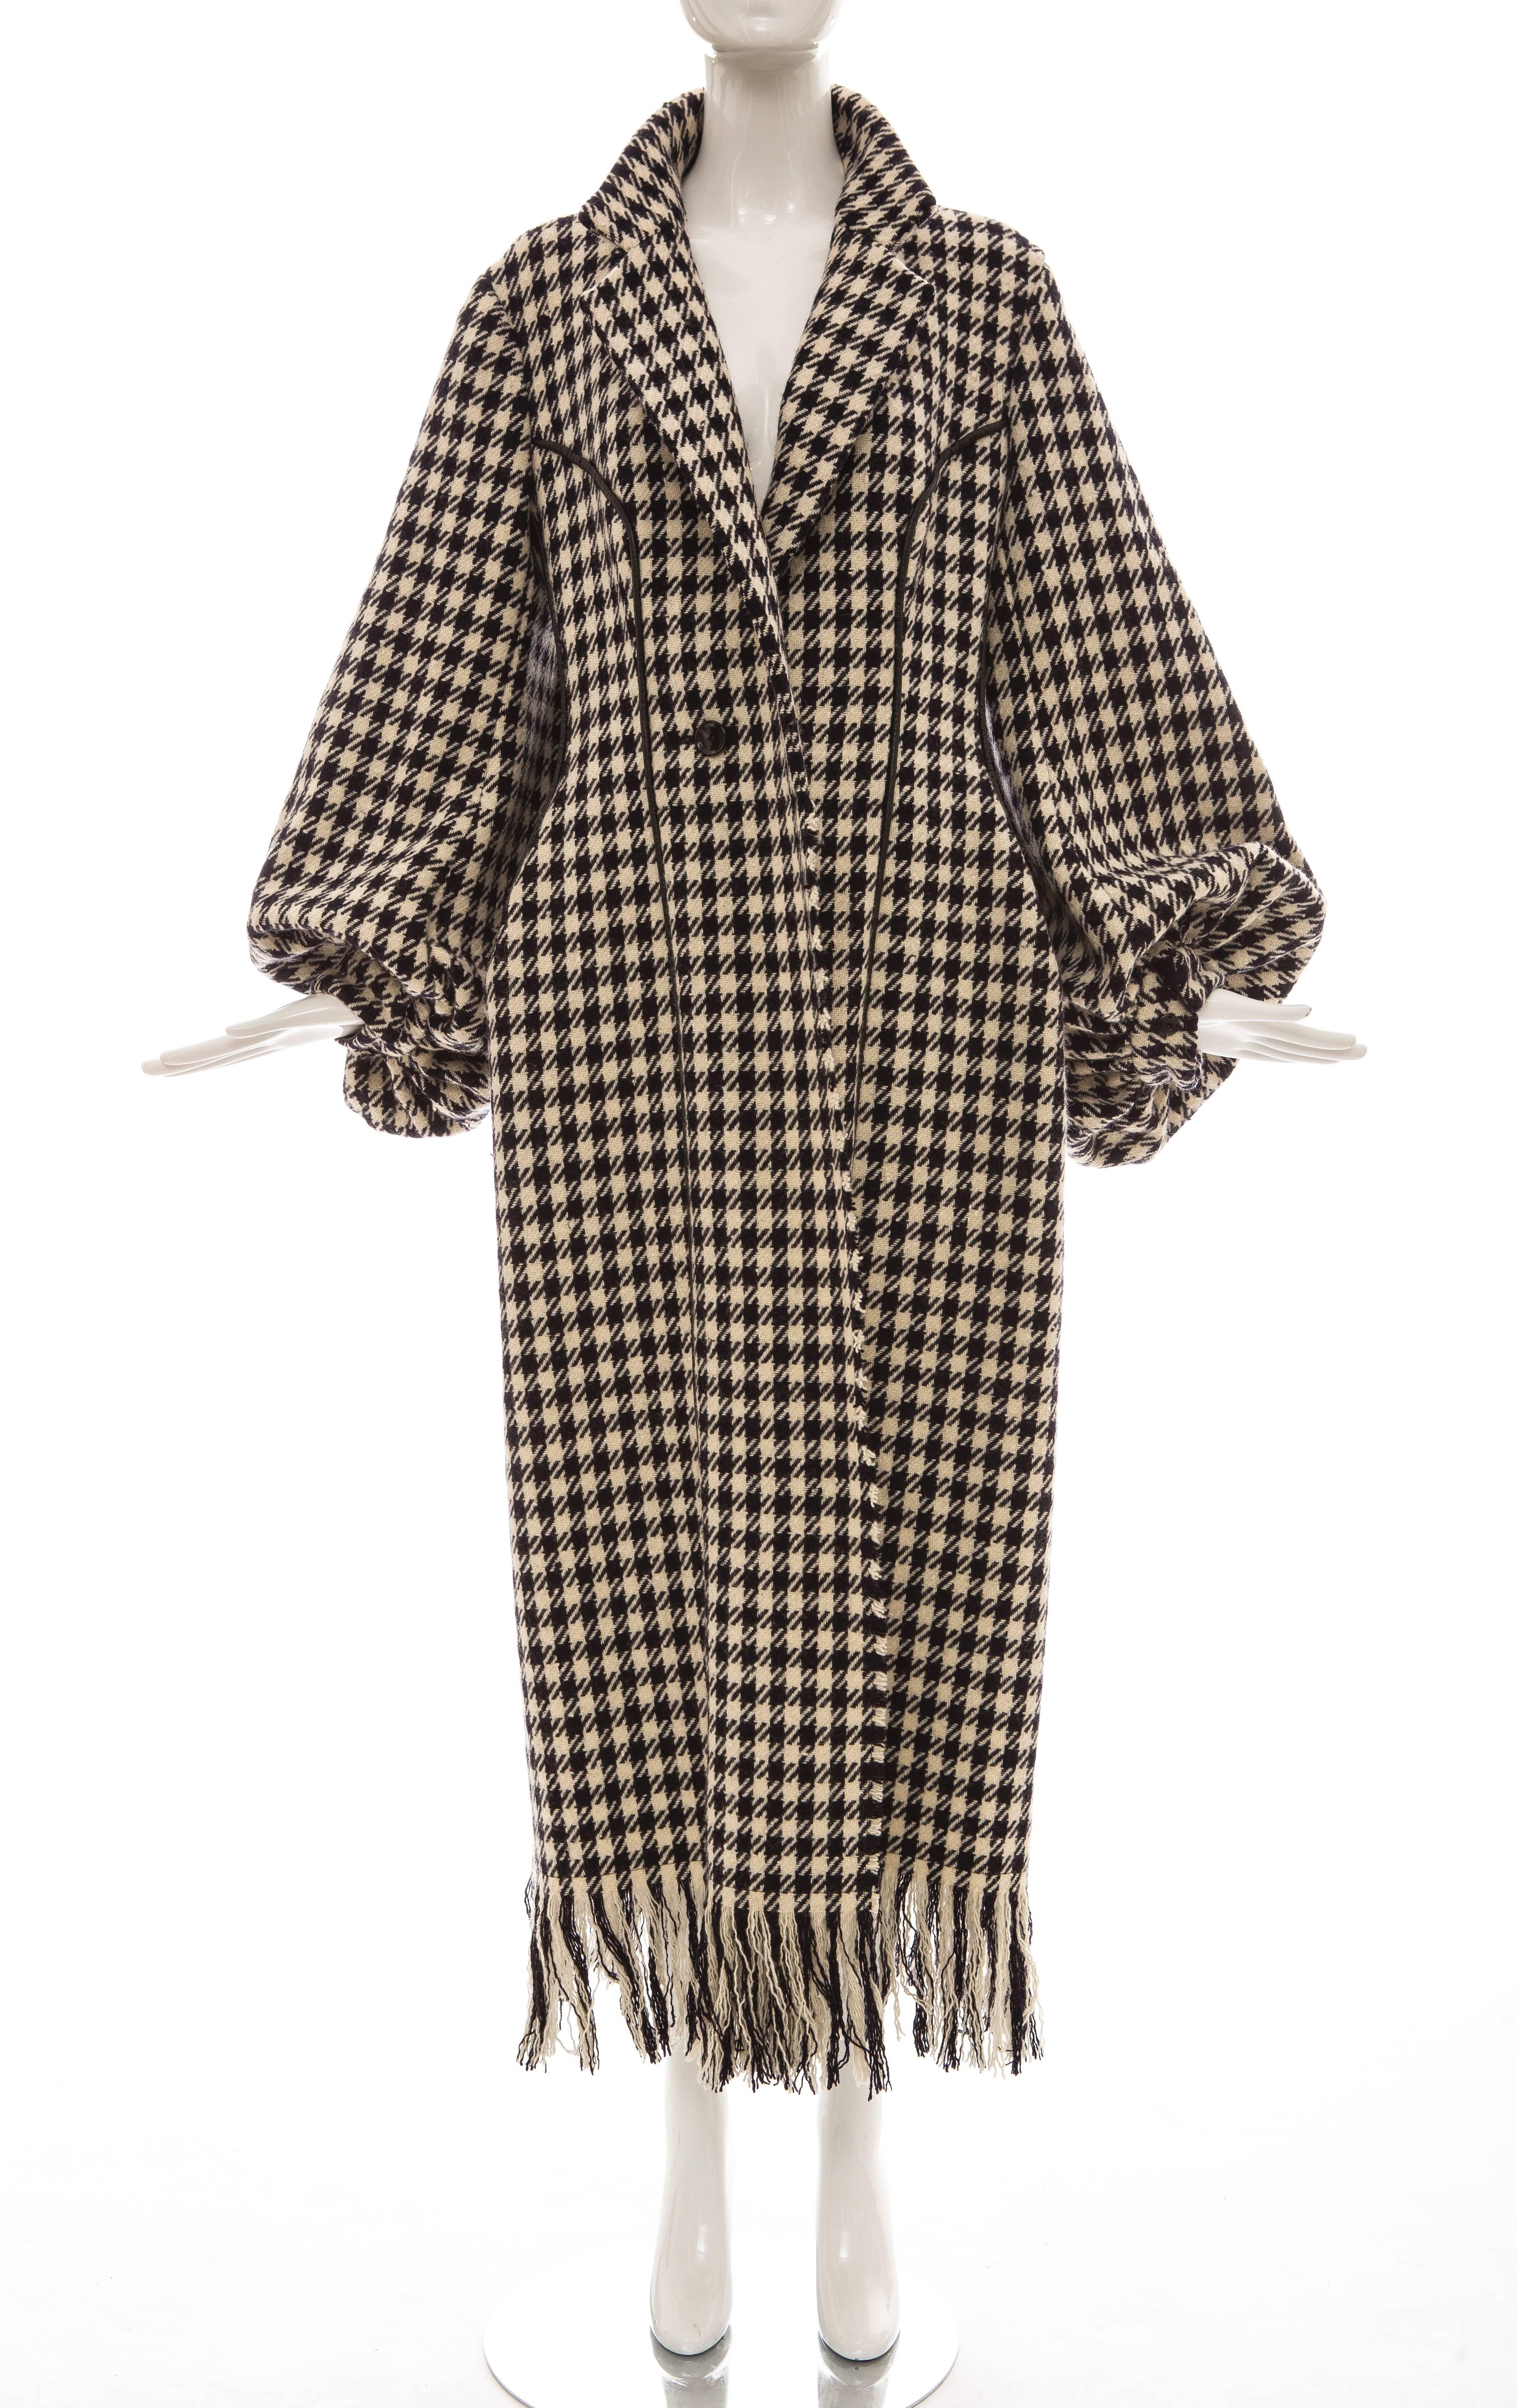 Yohji Yamamoto, Autumn-Winter 2003 black and white wool houndstooth coat featuring notched lapels, blouson sleeves, dual seam pockets, leather piping throughout, fringe trim at hem and single button closure at front.

Japan: Large

 Bust 42”,